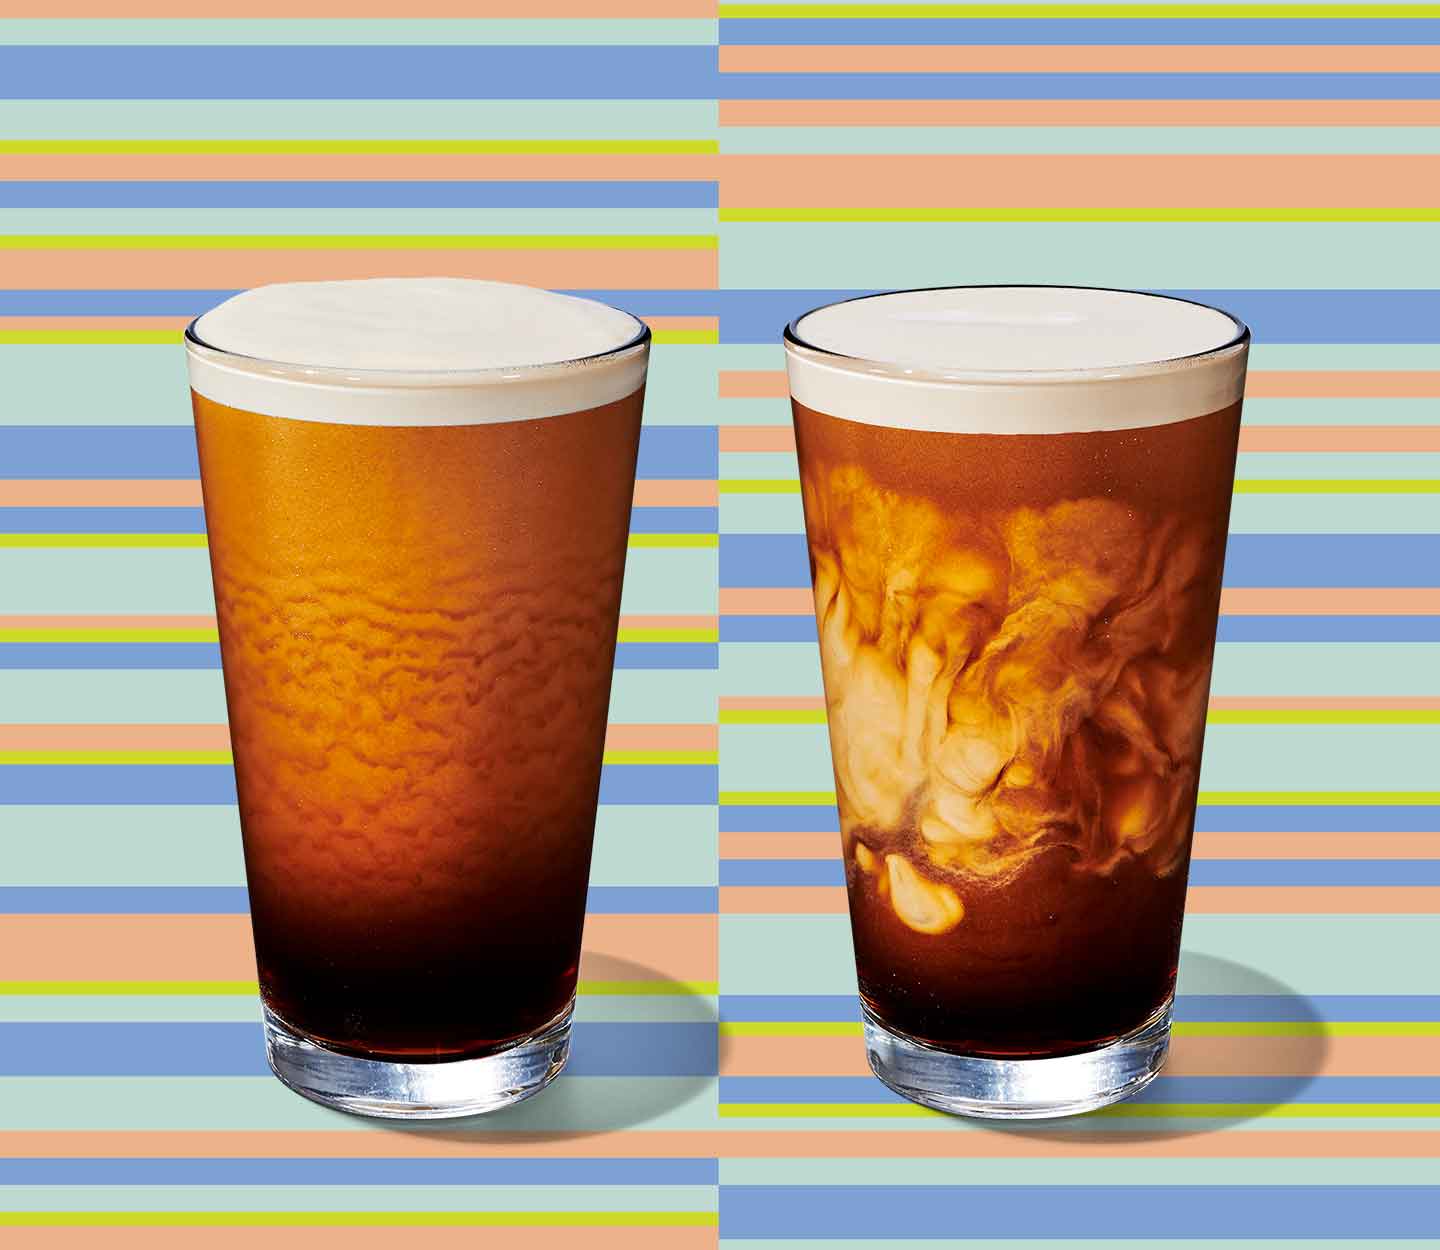 Two cold coffees side by side in glasses, both with a thick foam on top. The one on the right shows creamy marbling.